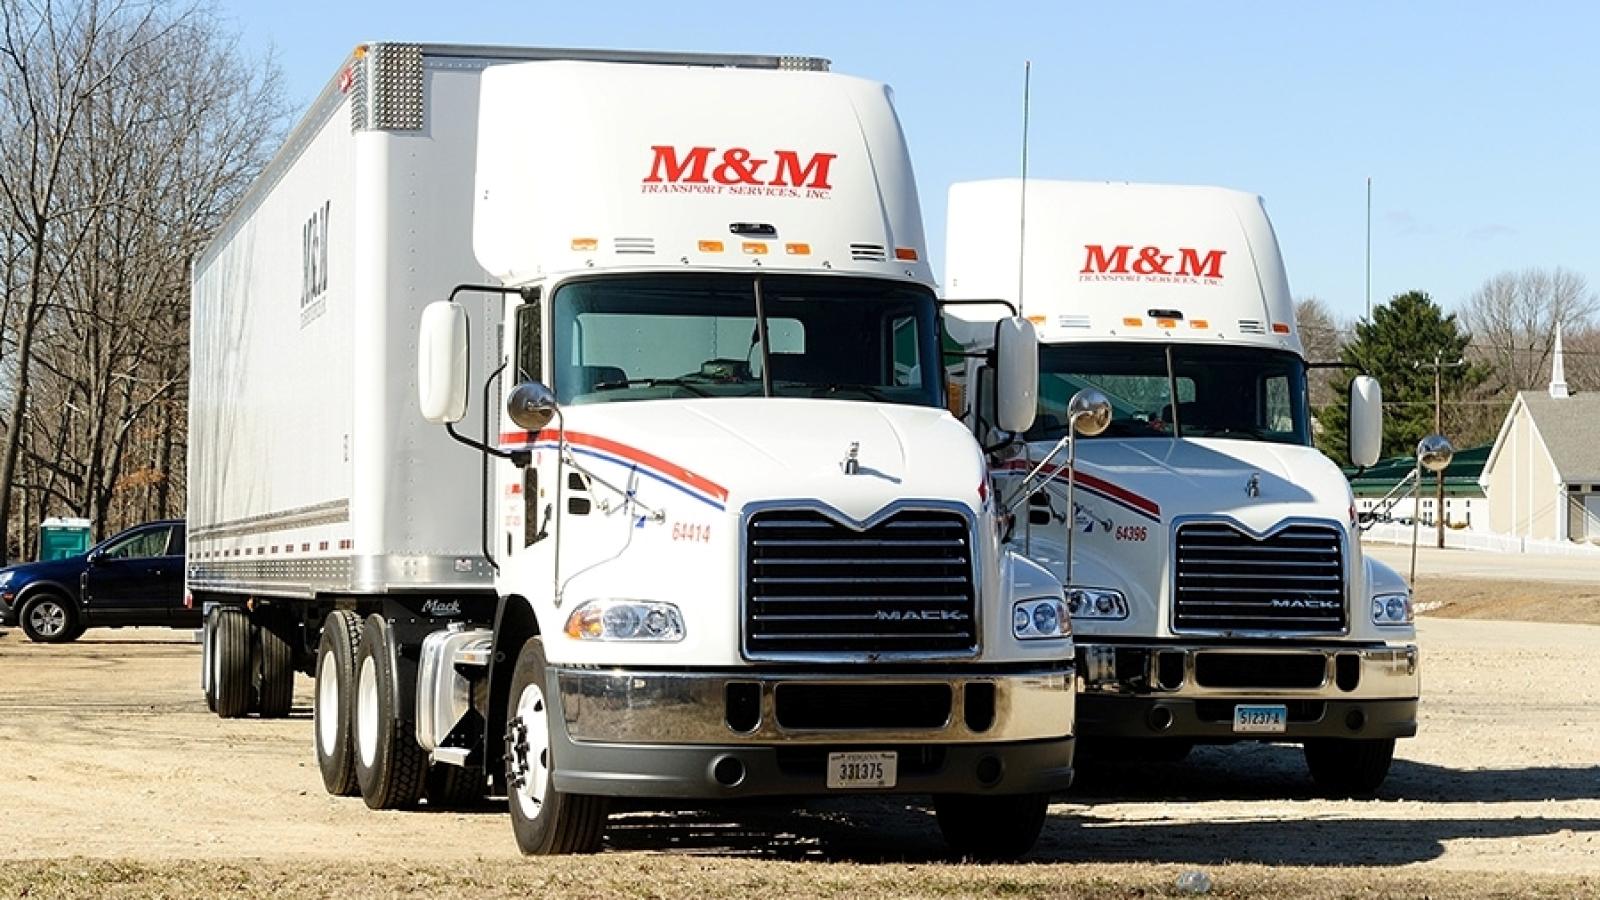 Improving US economy lifts outlook for trucking M&A activity – JOC.com